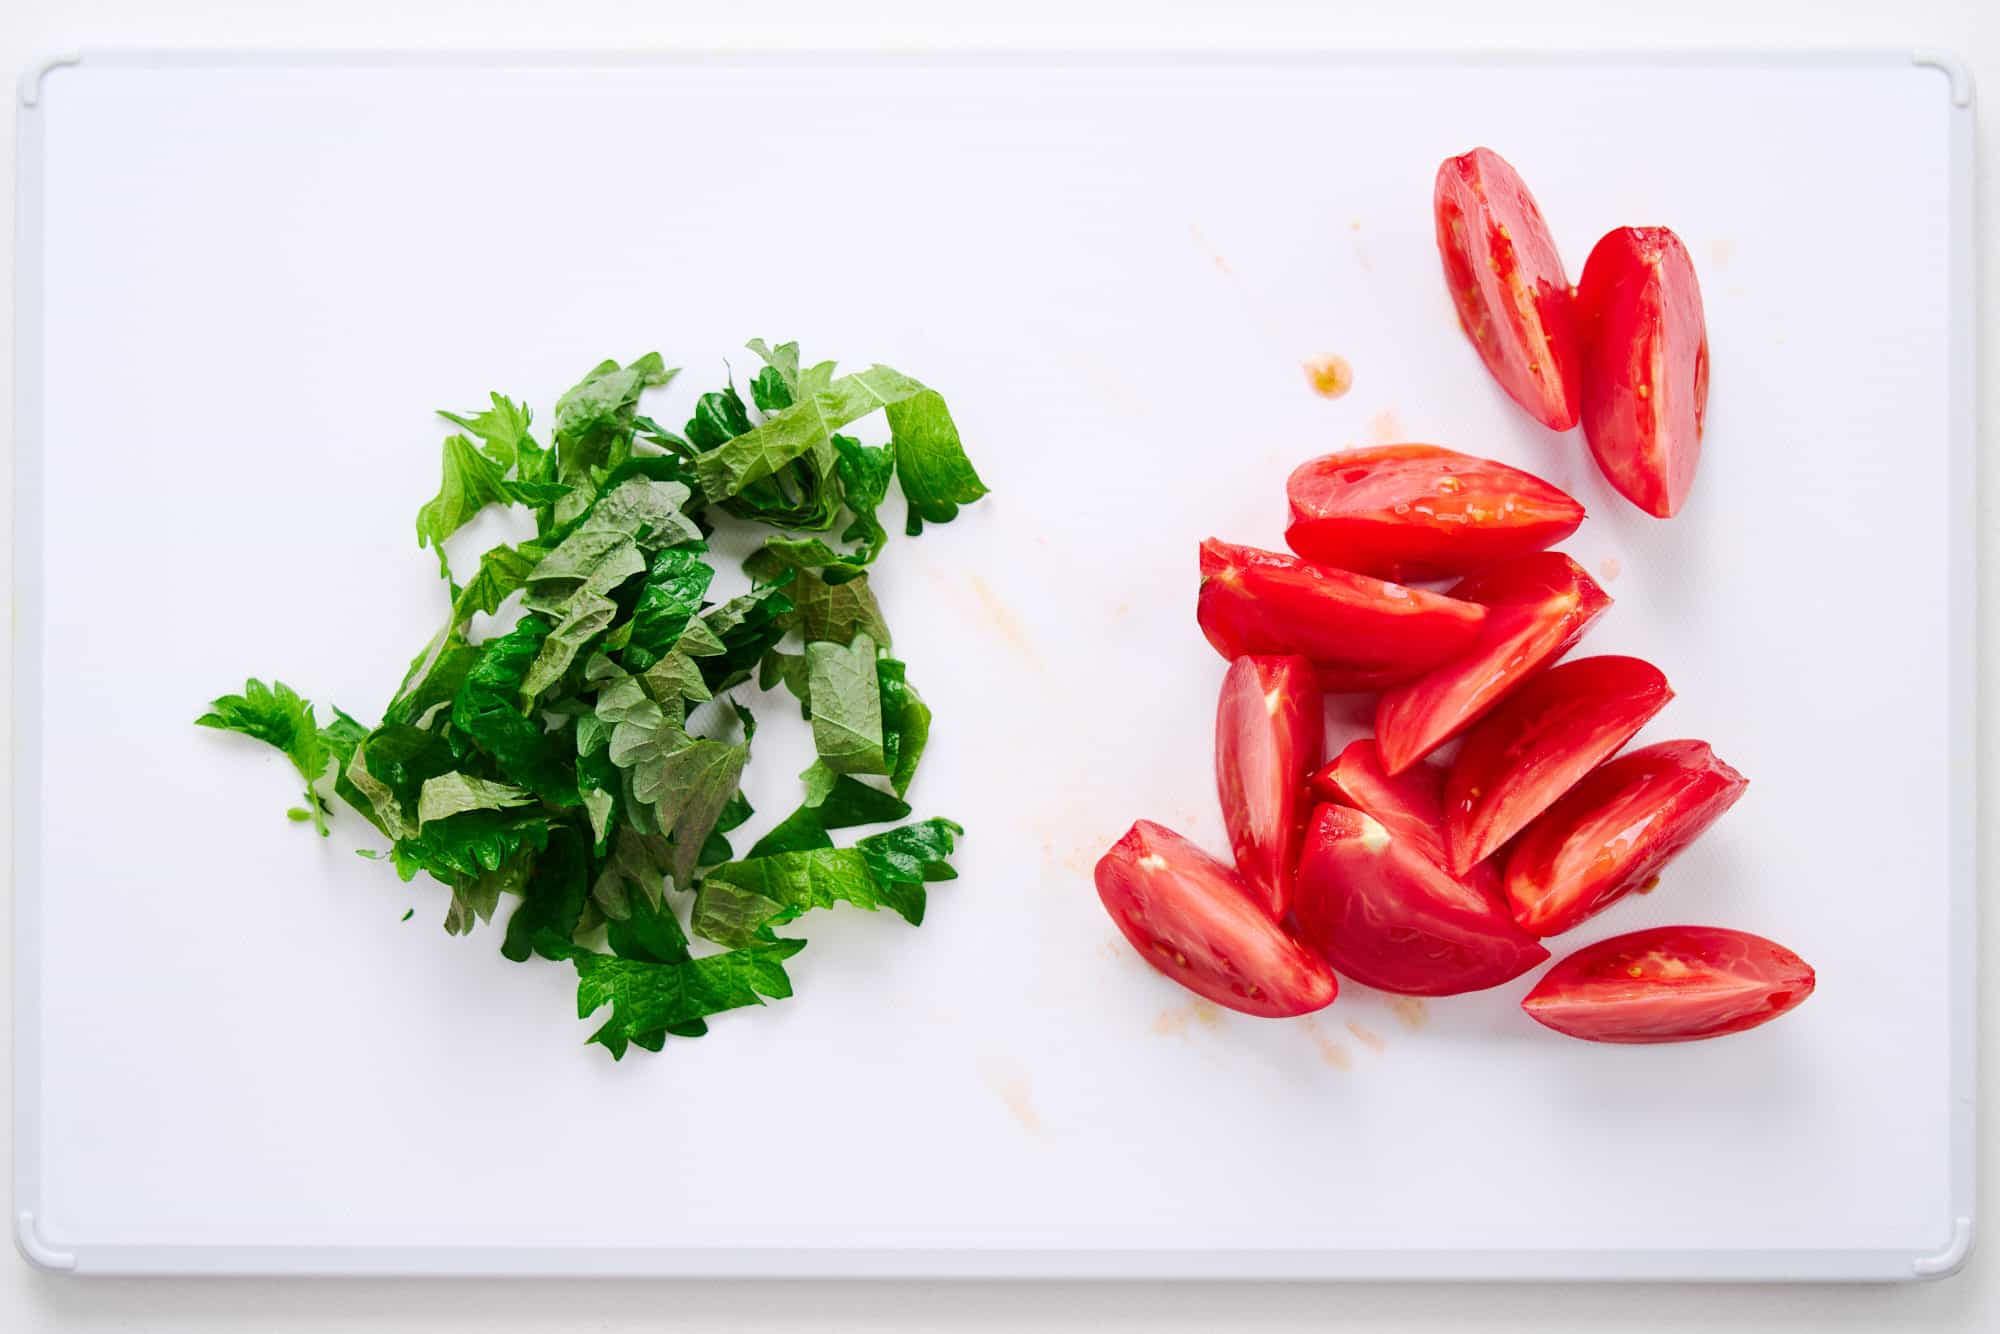 Chopped green shiso leaves with ripe tomato wedges.